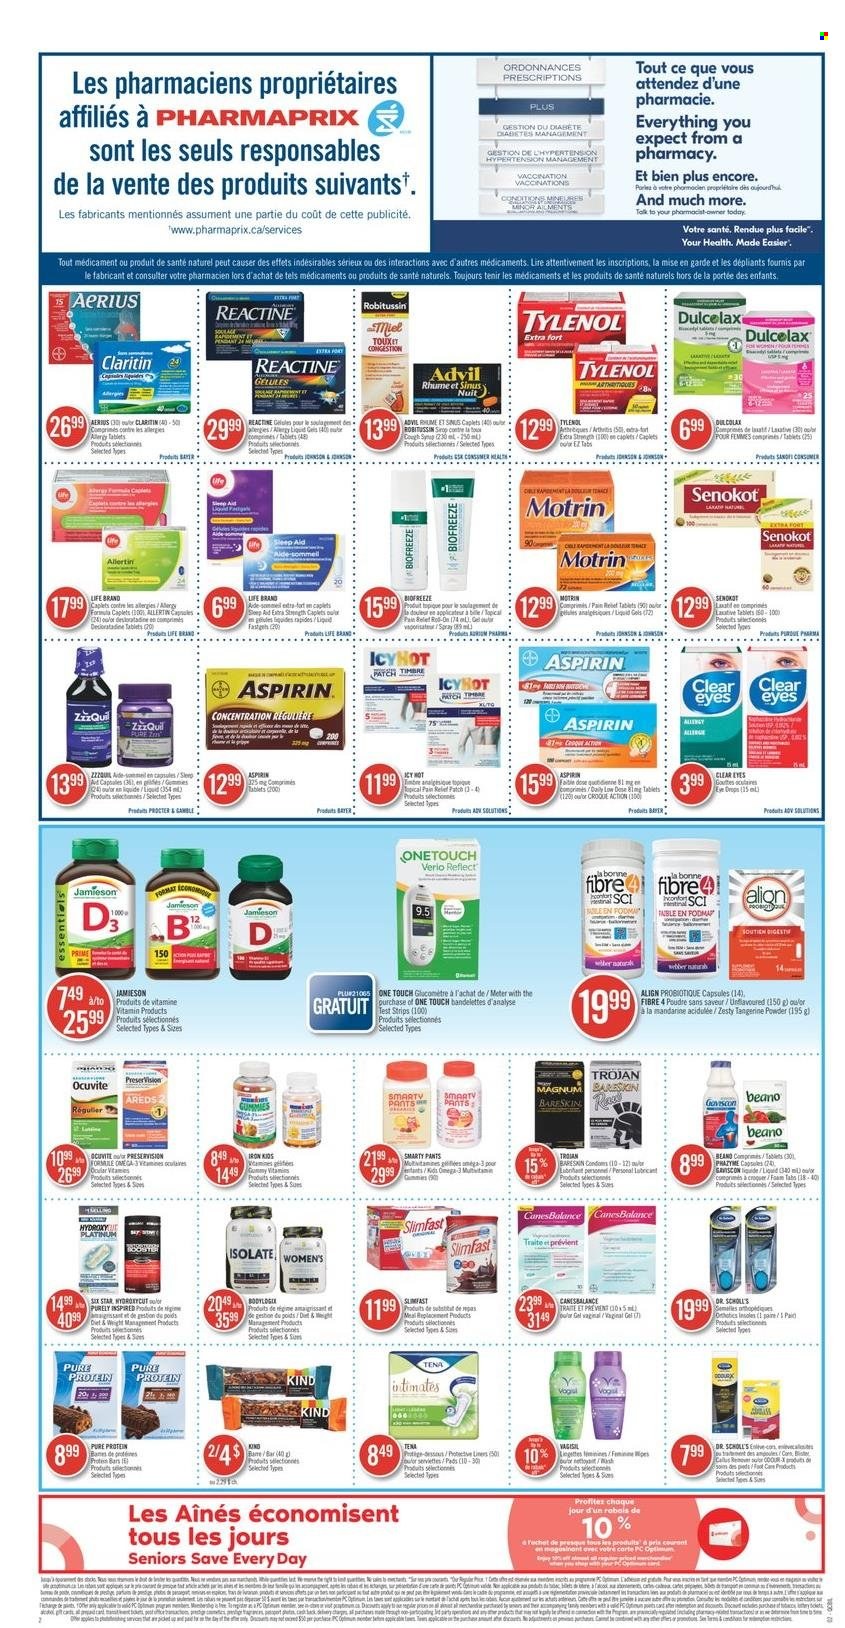 thumbnail - Pharmaprix Flyer - June 25, 2022 - June 30, 2022 - Sales products - Slimfast, Magnum, syrup, pants, Johnson's, lubricant, foot care, pot, pain relief, Dulcolax, Tylenol, ZzzQuil, Omega-3, eye drops, Advil Rapid, laxative, Low Dose, aspirin, Motrin, Dr. Scholl's, Robitussin, Ocuvite, Tena Lady. Page 2.